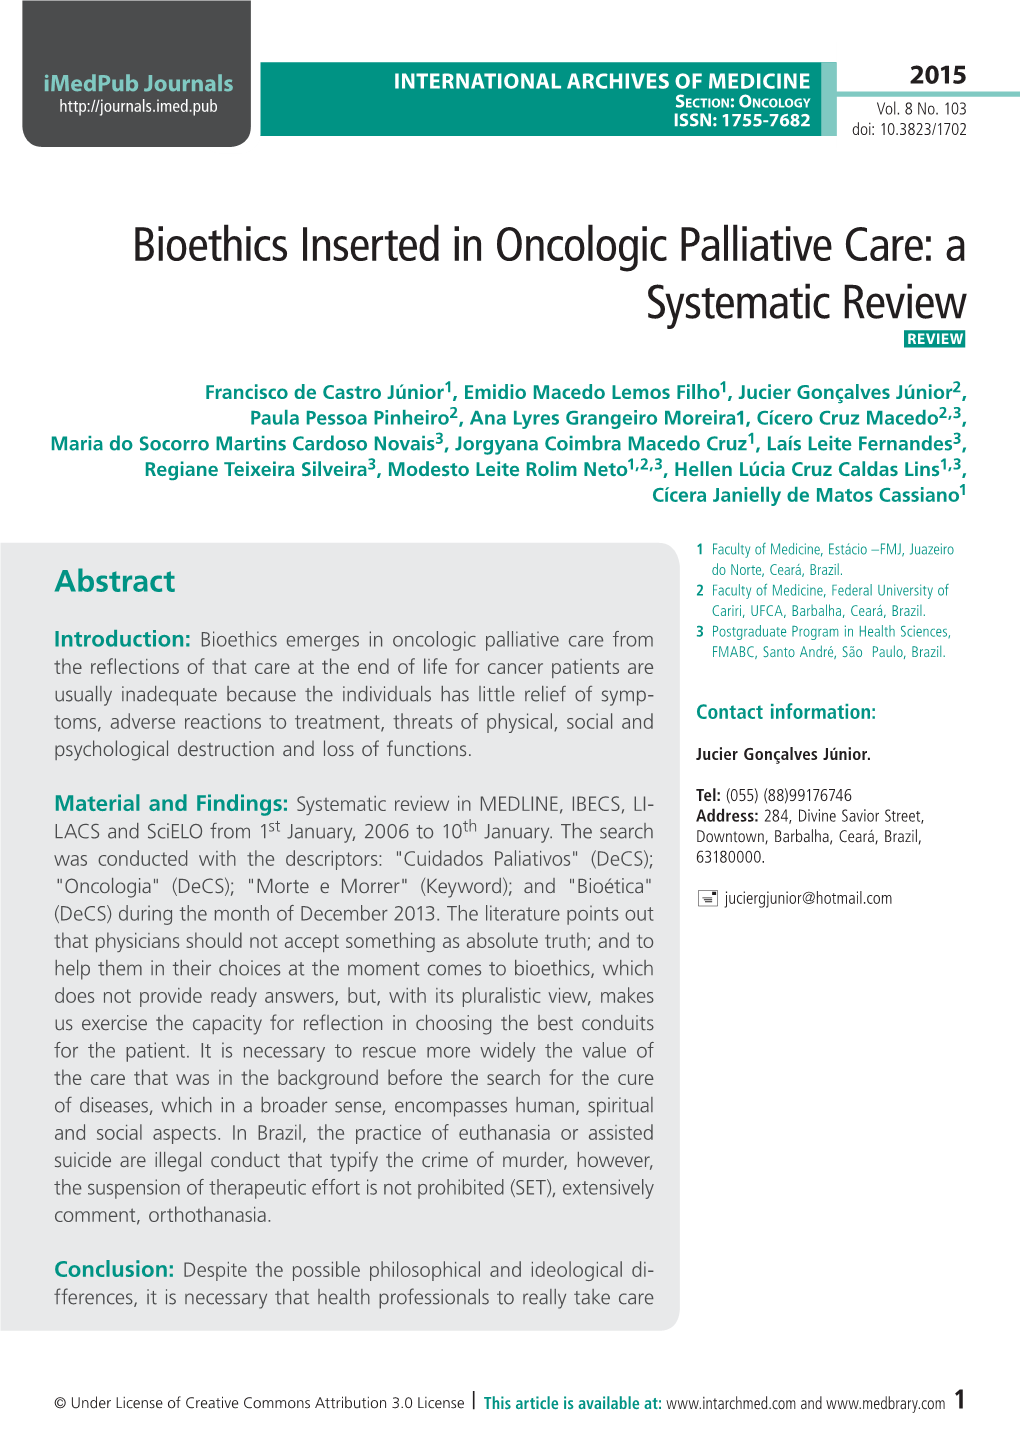 Bioethics Inserted in Oncologic Palliative Care: a Systematic Review Review